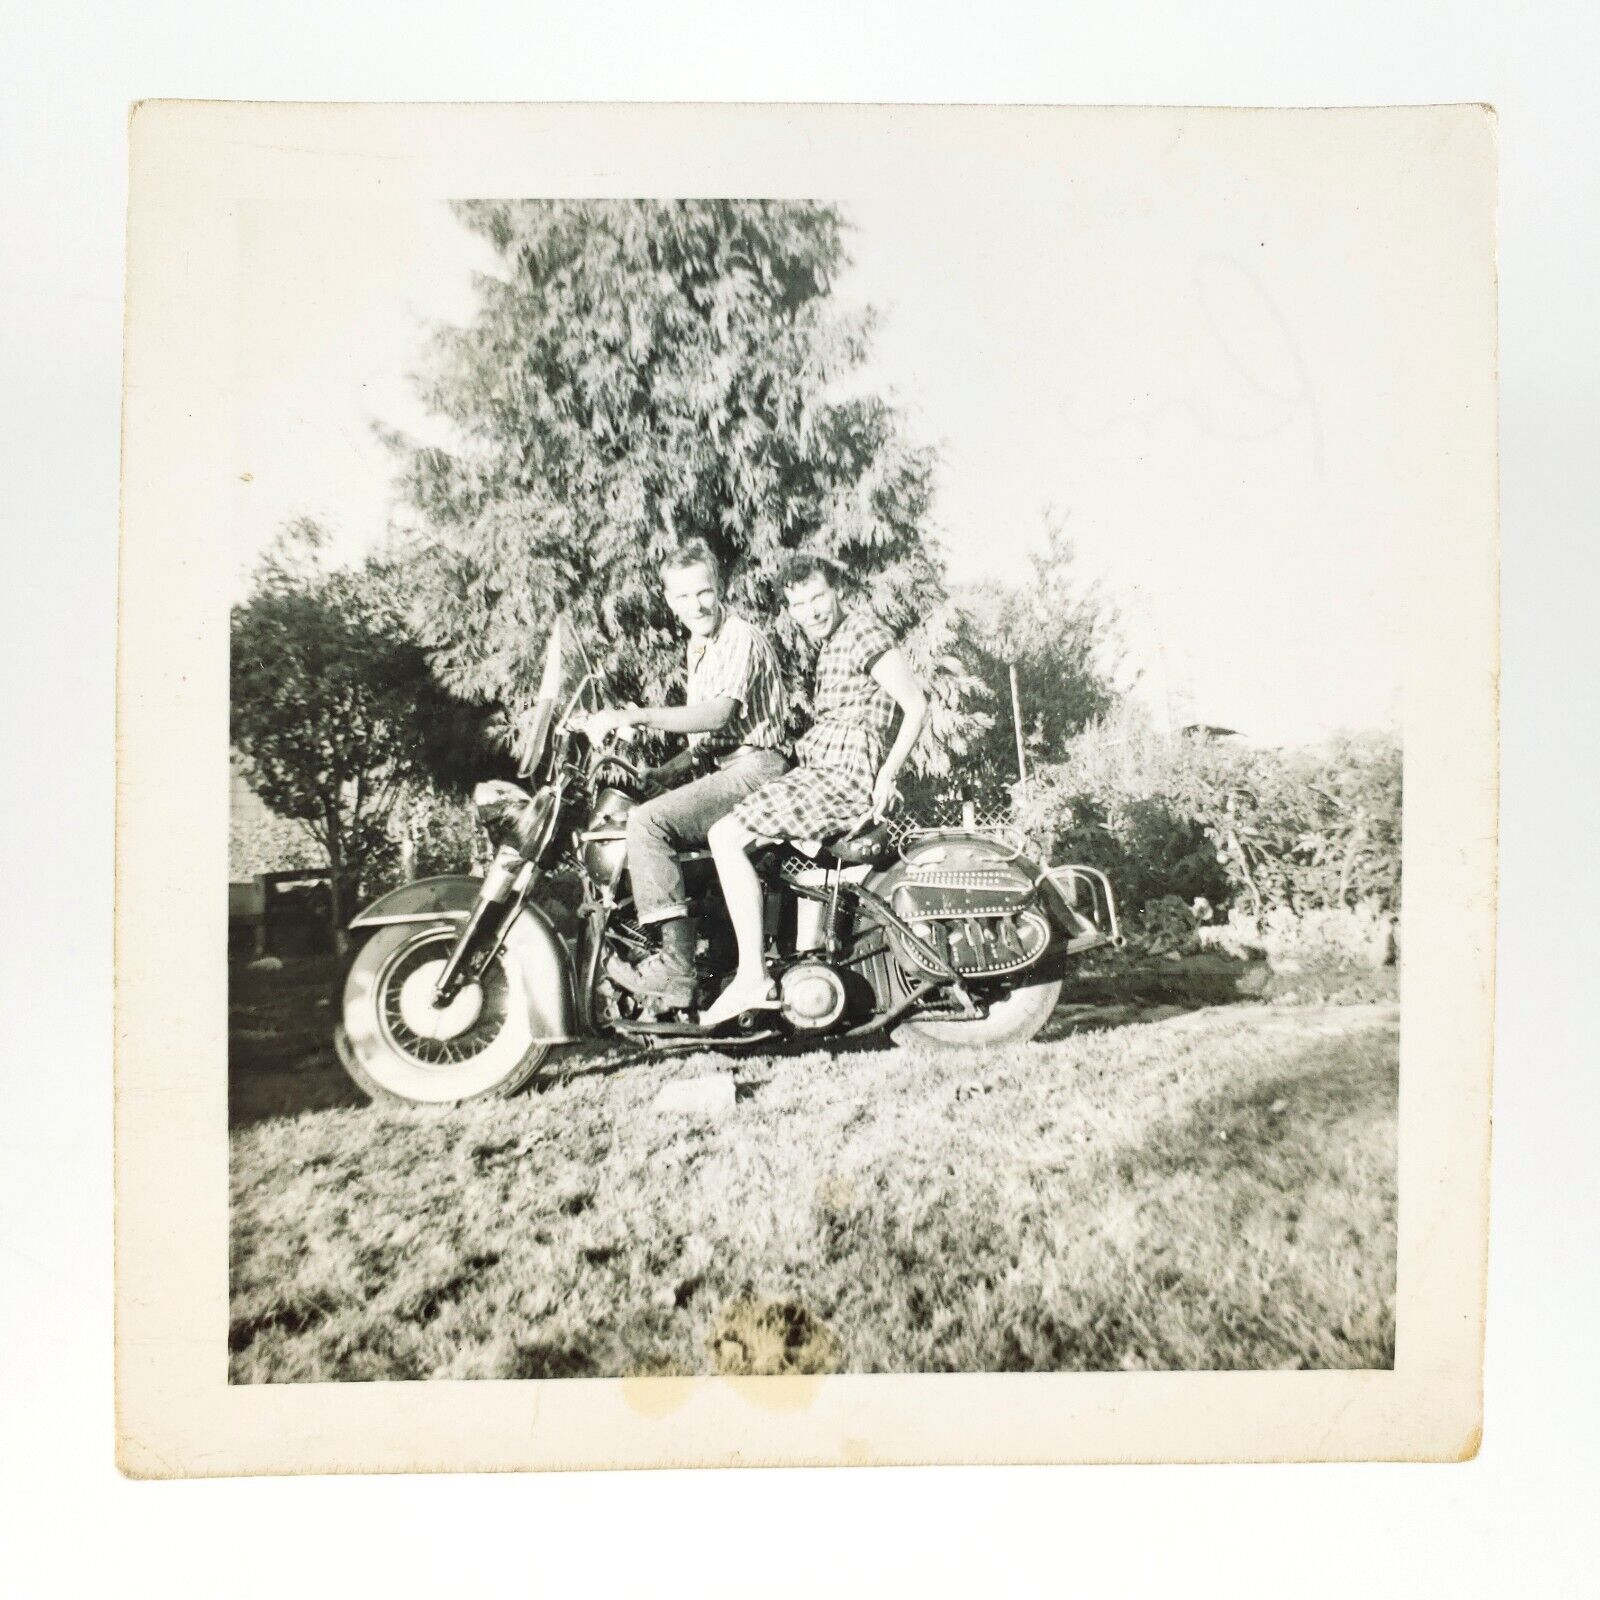 Mom & Son Riding Motorcycle Photo 1940s Biker Man Mother Tree Snapshot A4287